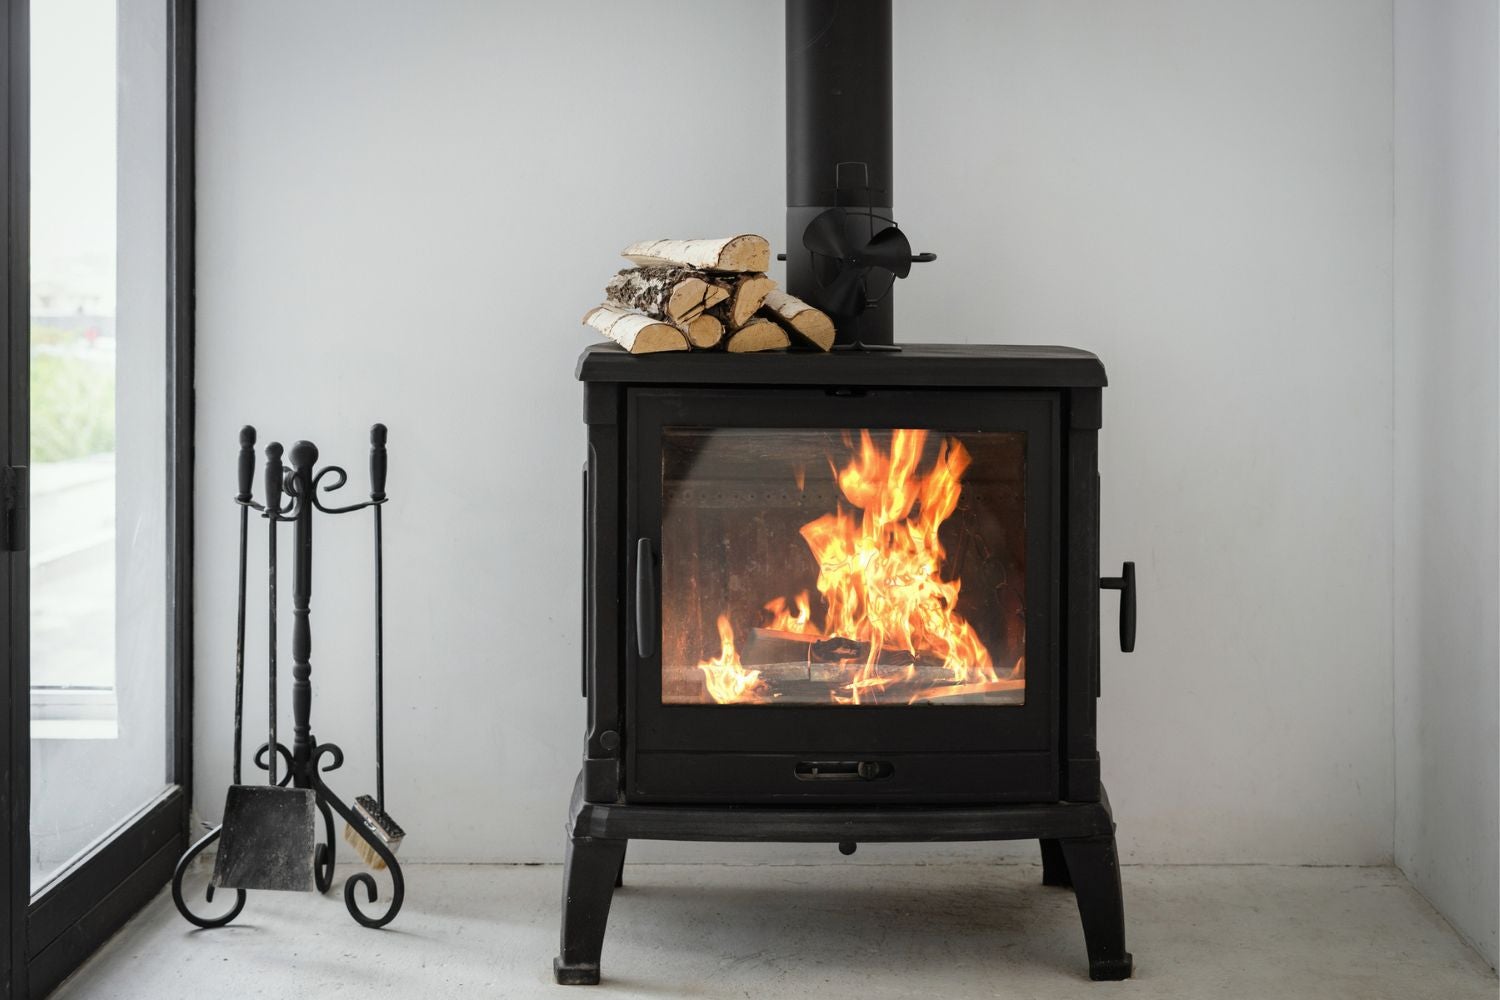 How To Install A Wood Stove Without A Chimney